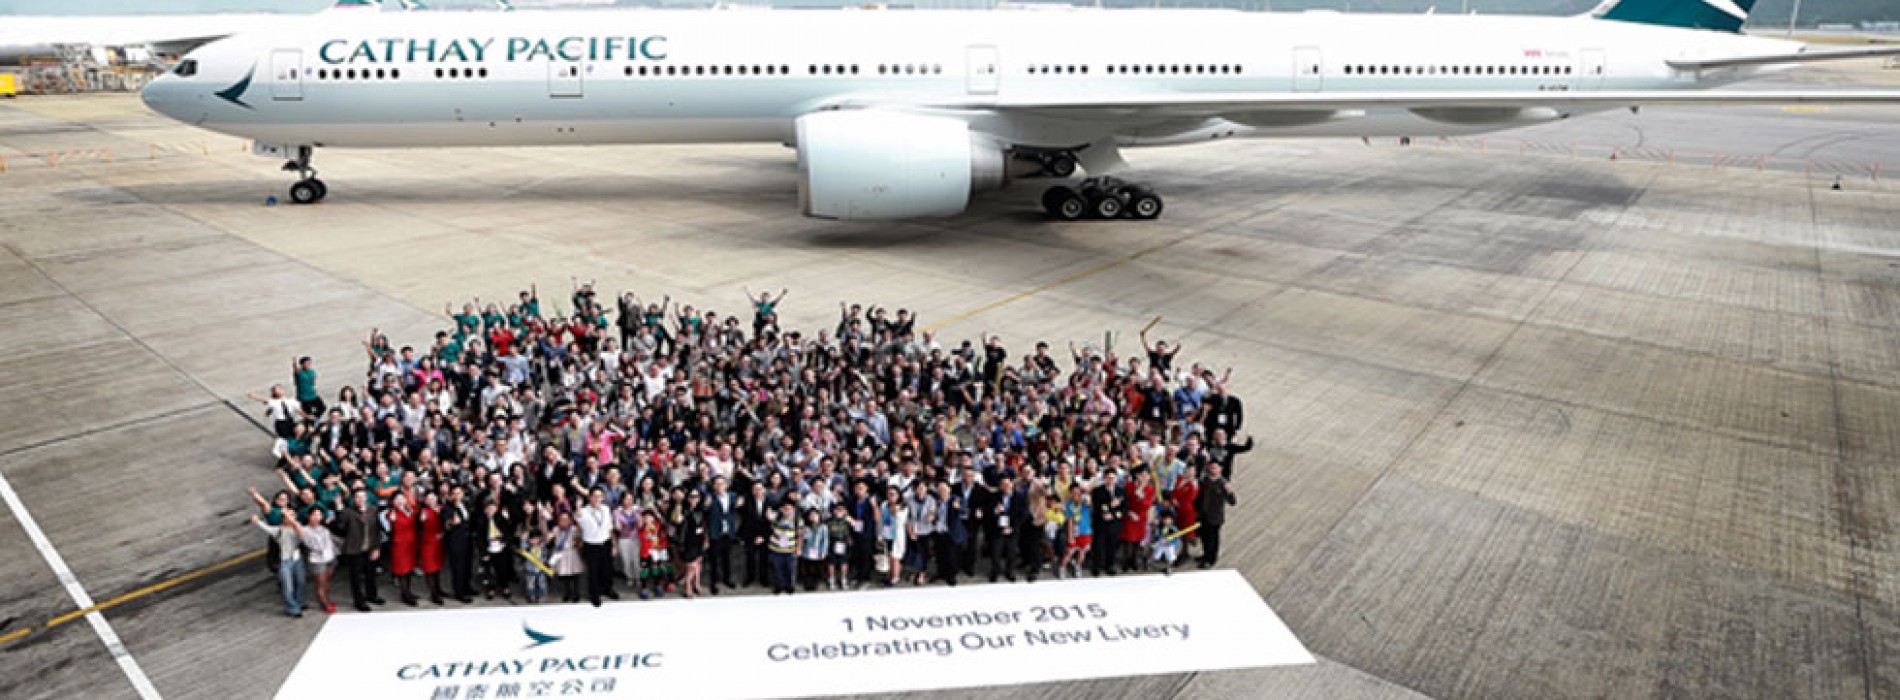 Cathay Pacific unveils changes to its aircraft livery